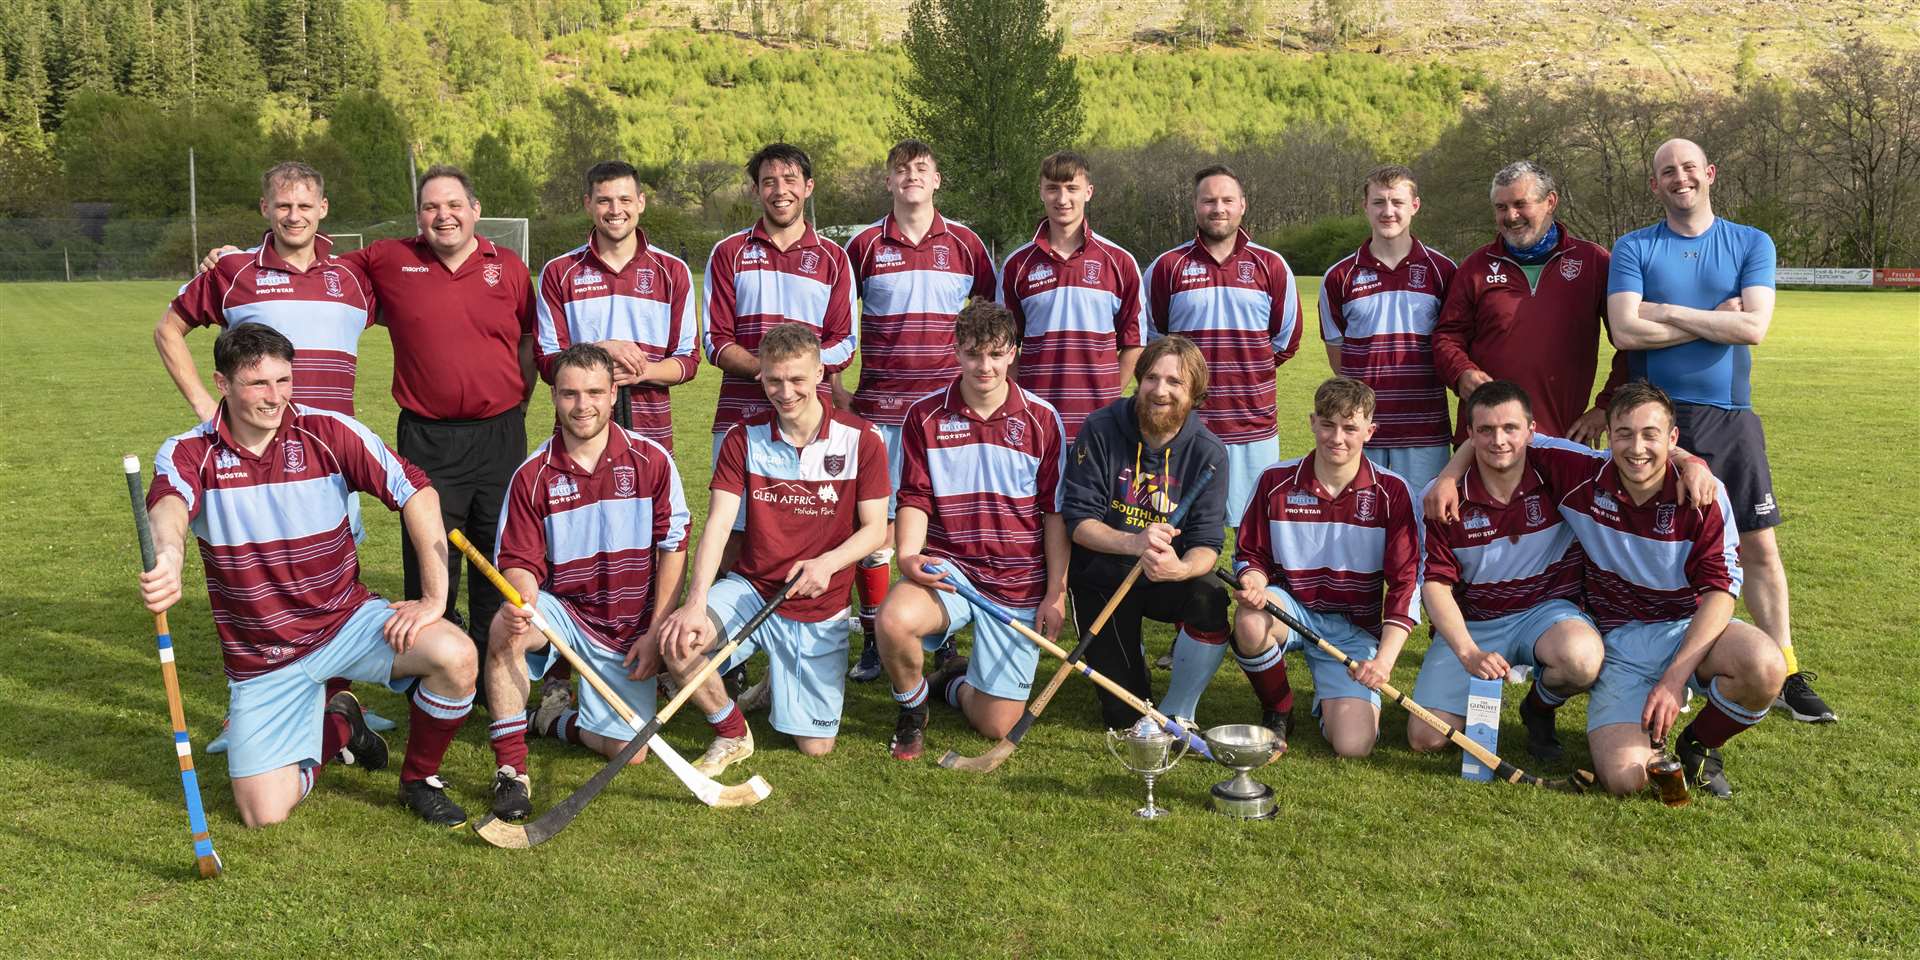 The victorious Strathglass team after winning The Macdonald Cup 2021, Strathglass v Glenurquhart, played at Cannich, under strict Covid protocols.